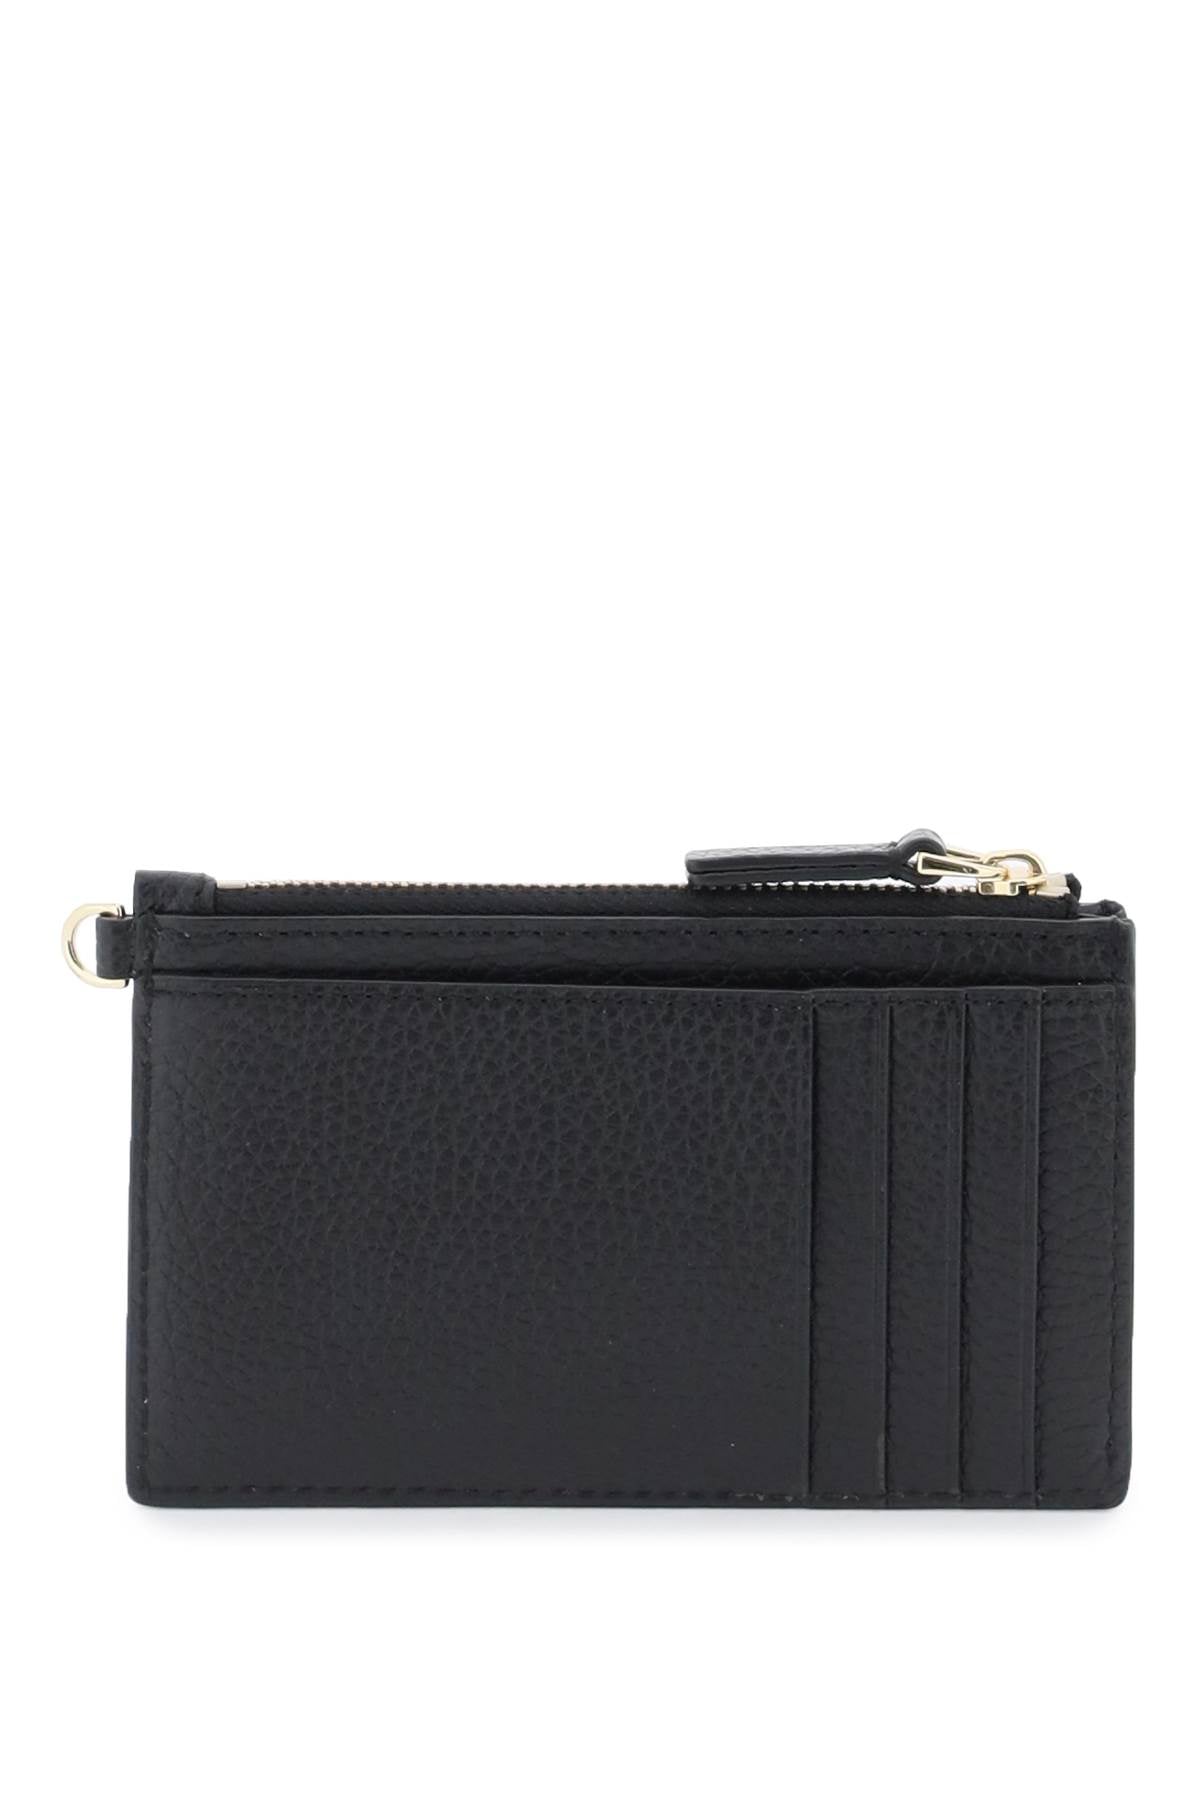 Marc Jacobs Marc jacobs the leather top zip wristlet